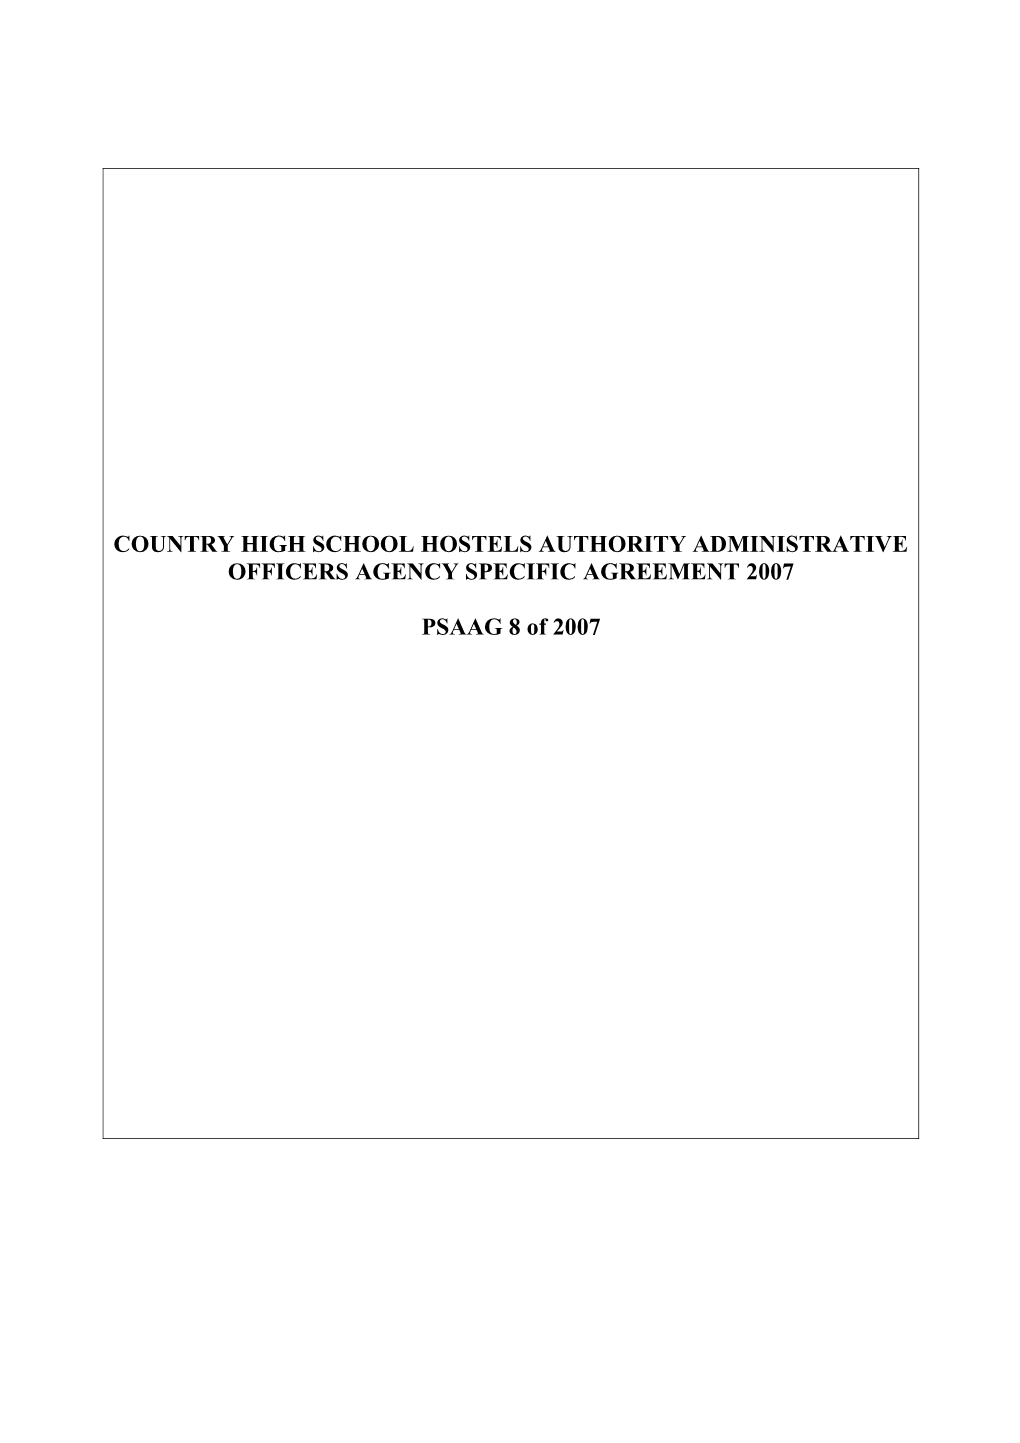 Country High School Hostels Authority Administrative Officers Agency Specific Agreement